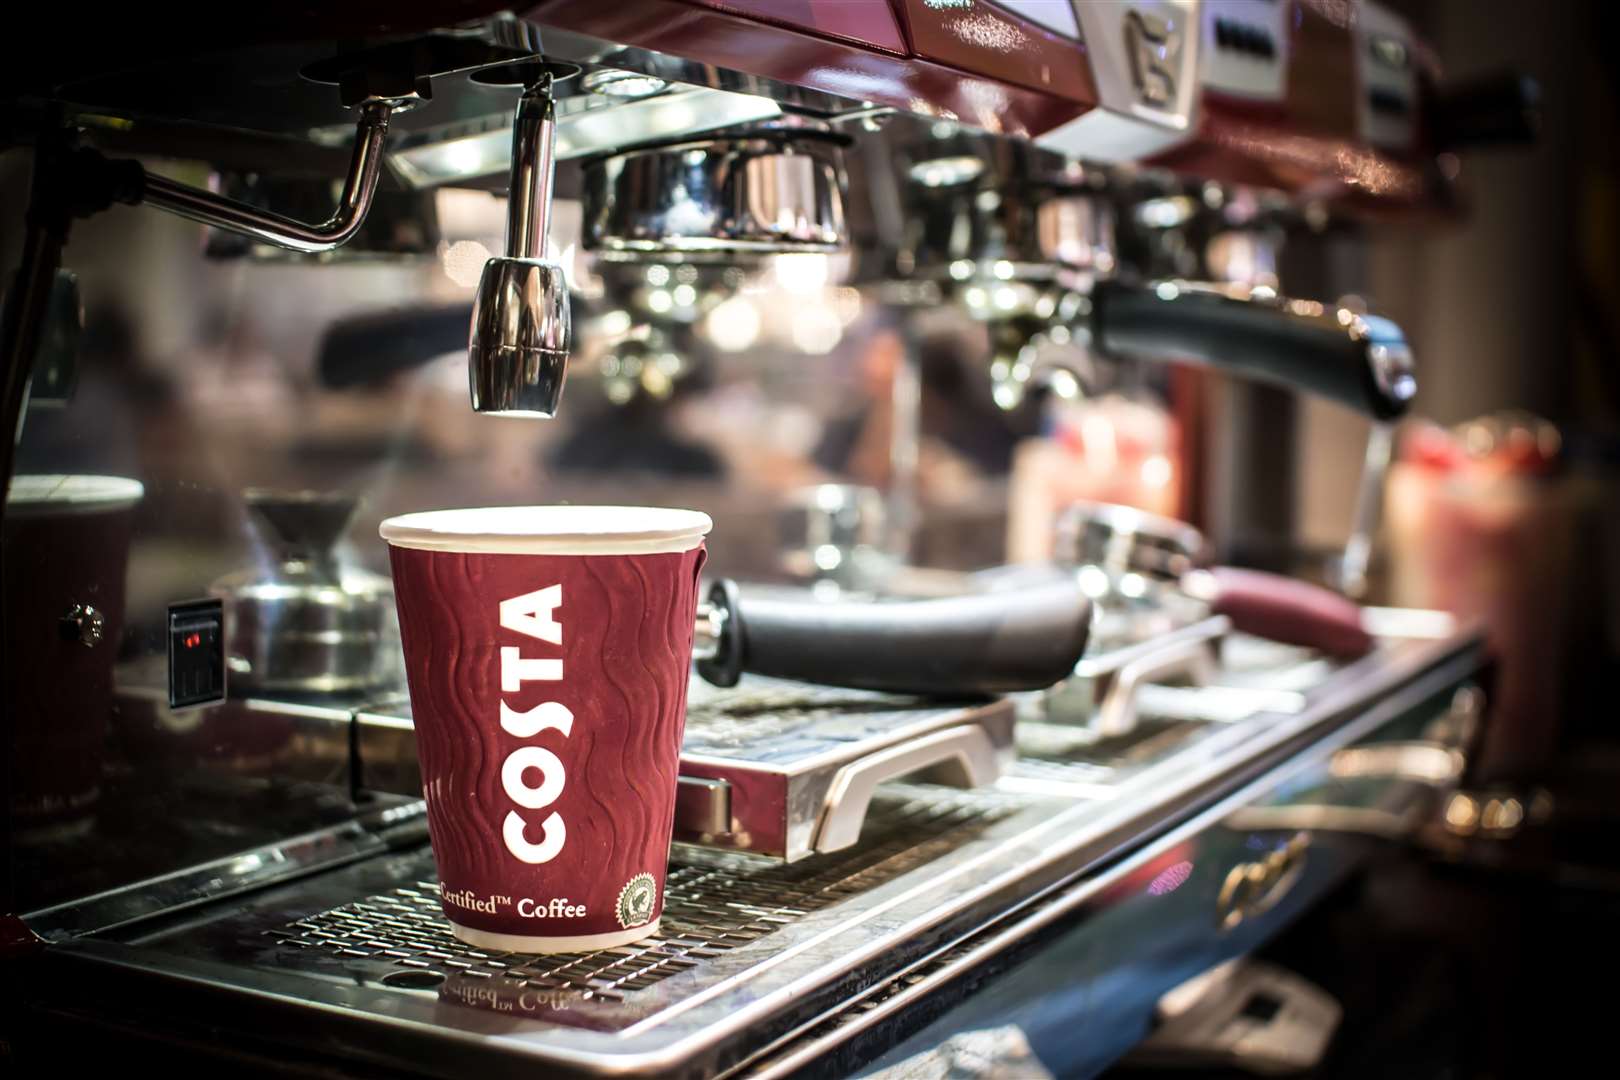 Having once been shunned, Costa is now seen as a key driver of footfall for town centres